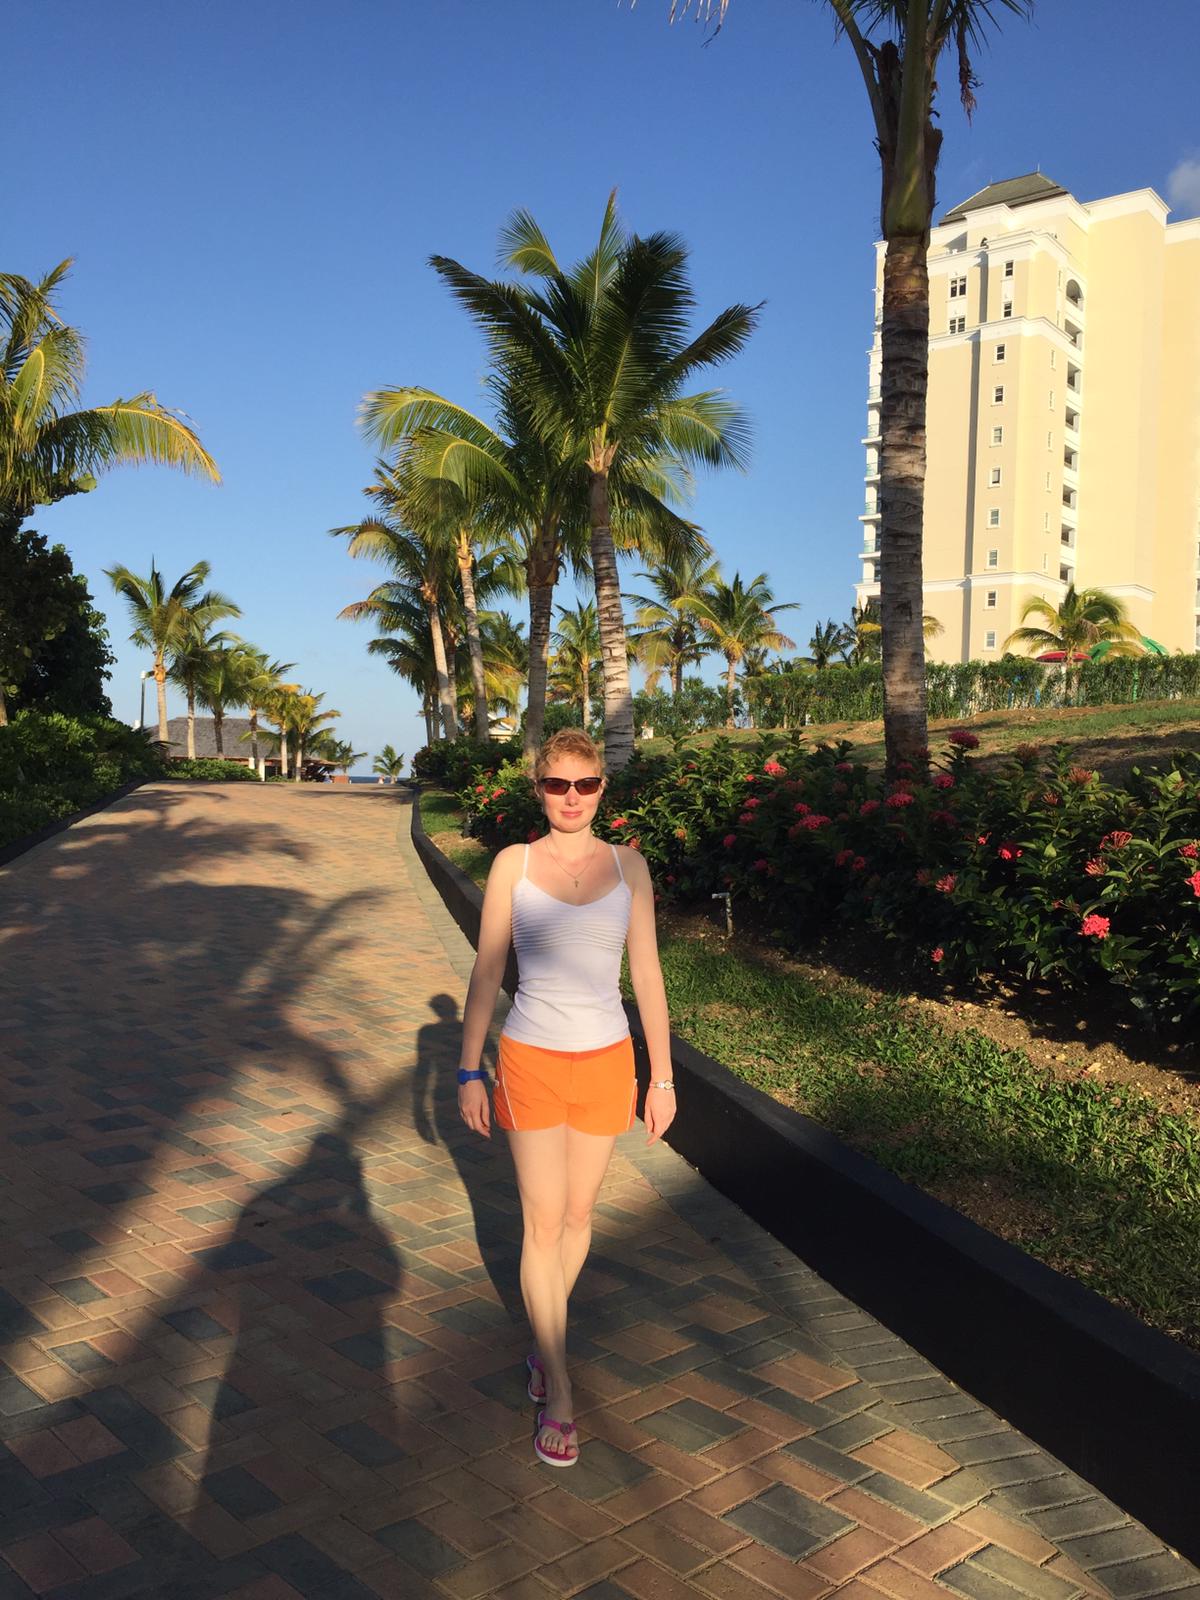 Elena in shorts and sun top on a palm tree lined brick walkway